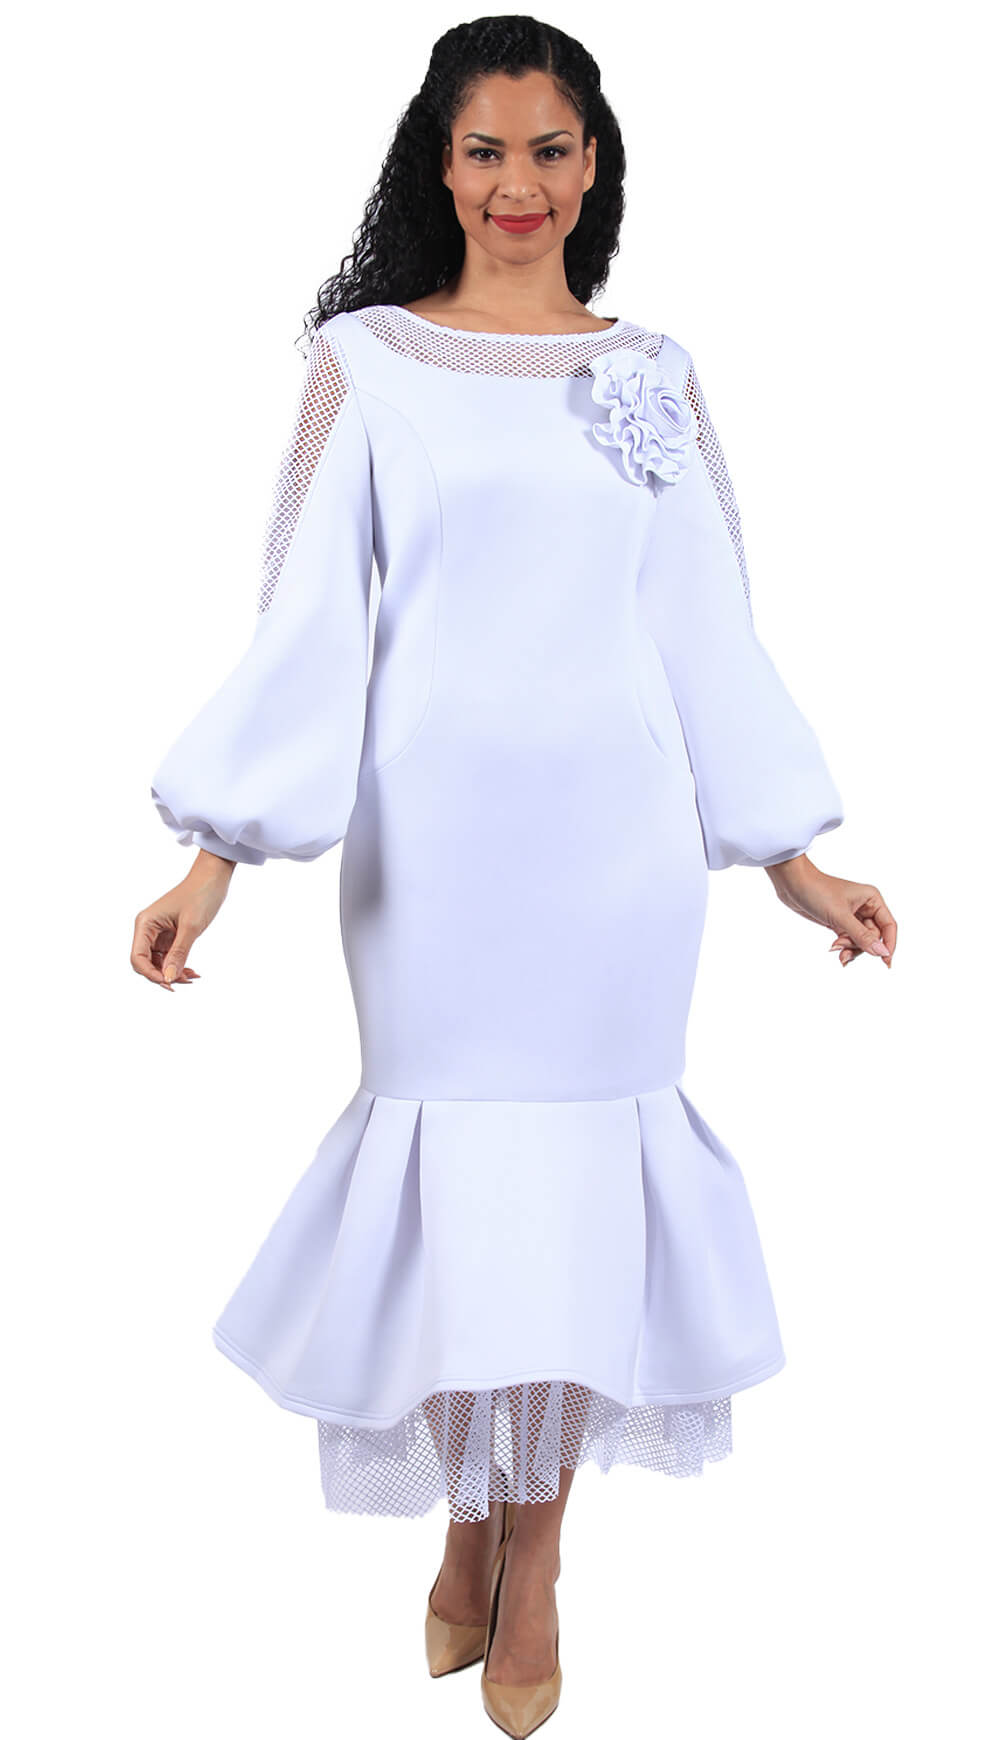 Diana Couture Church Dress 8659C-White - Church Suits For Less